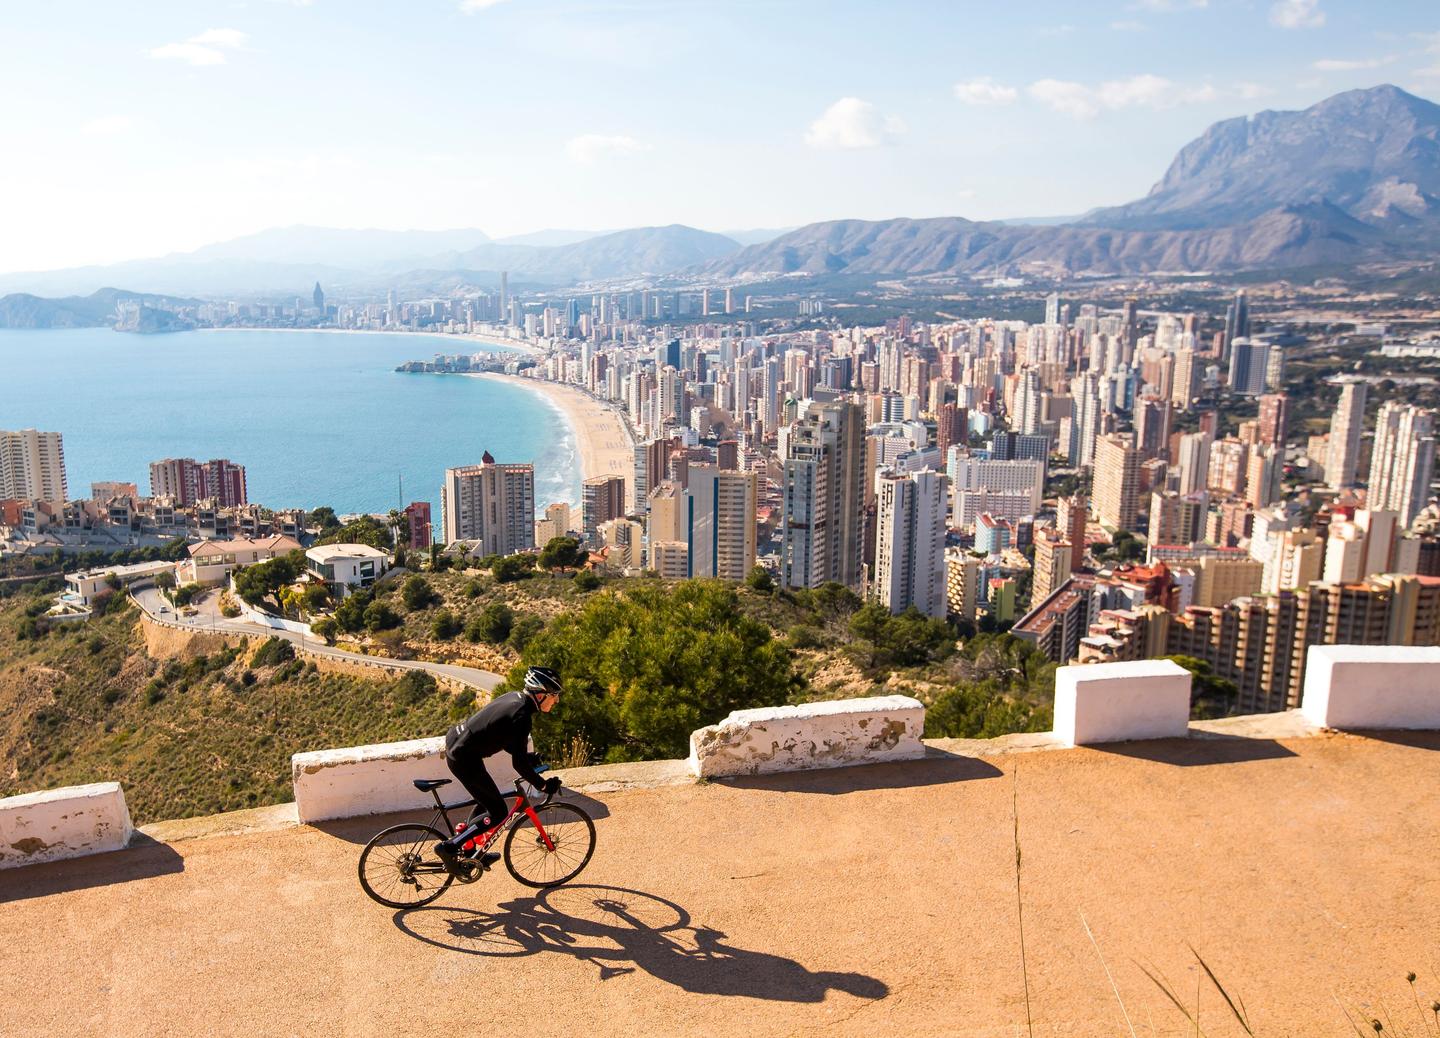 “Aerial view of cyclists riding on a winding road with a vast cityscape, coastline, and mountains in the background in Calpe, Costa Blanca.”